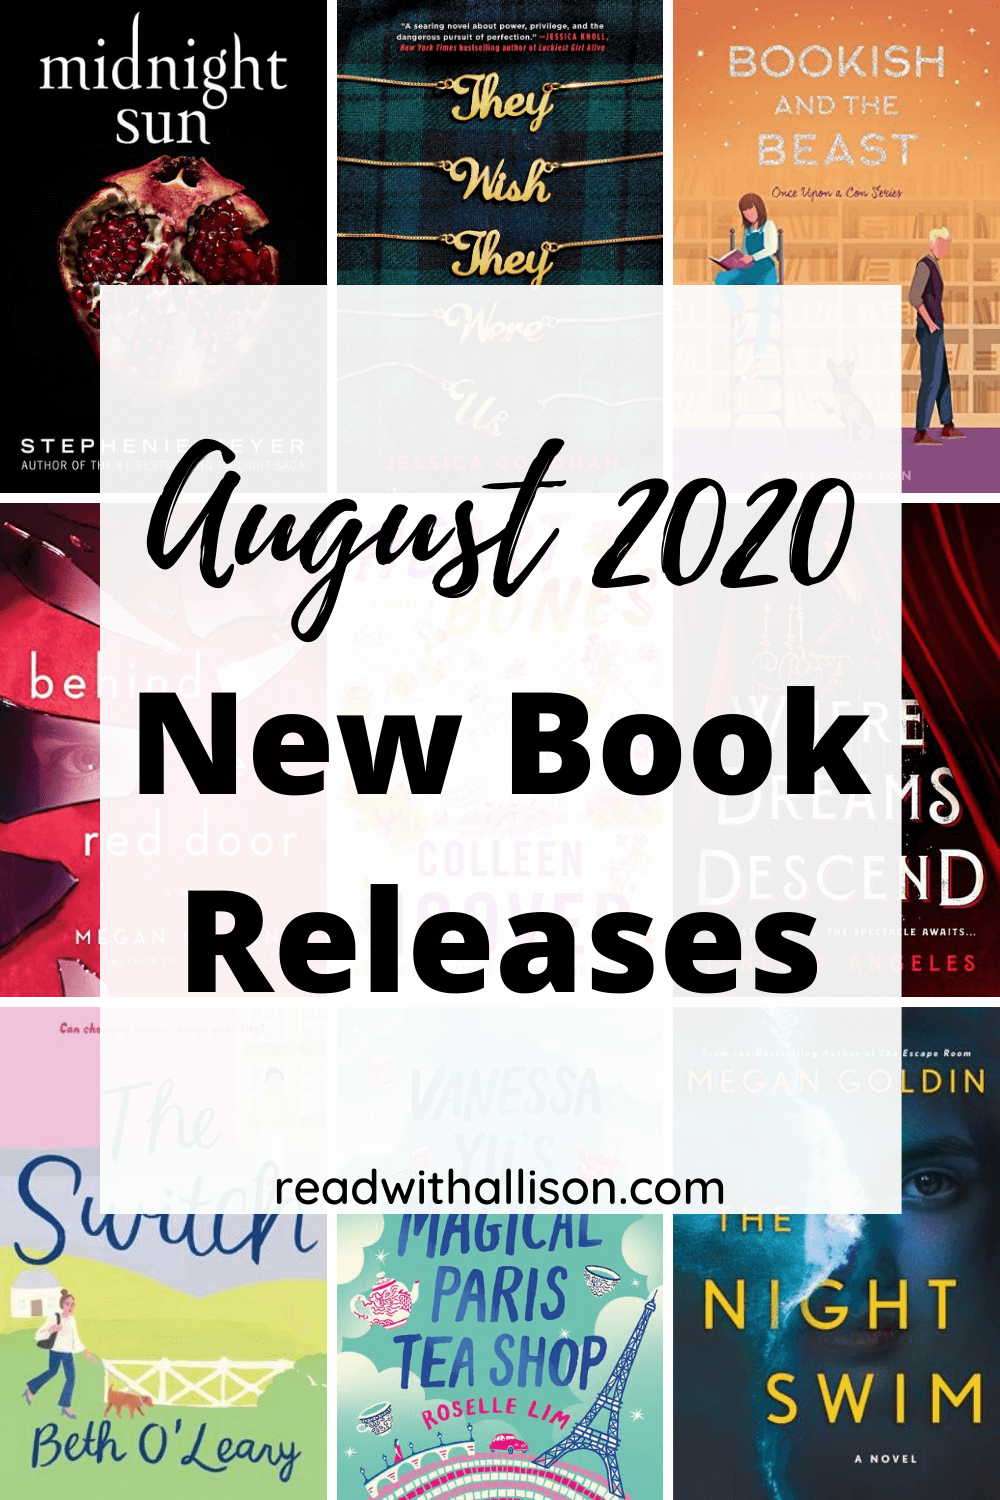 New Book Releases August 2020 - Read With Allison